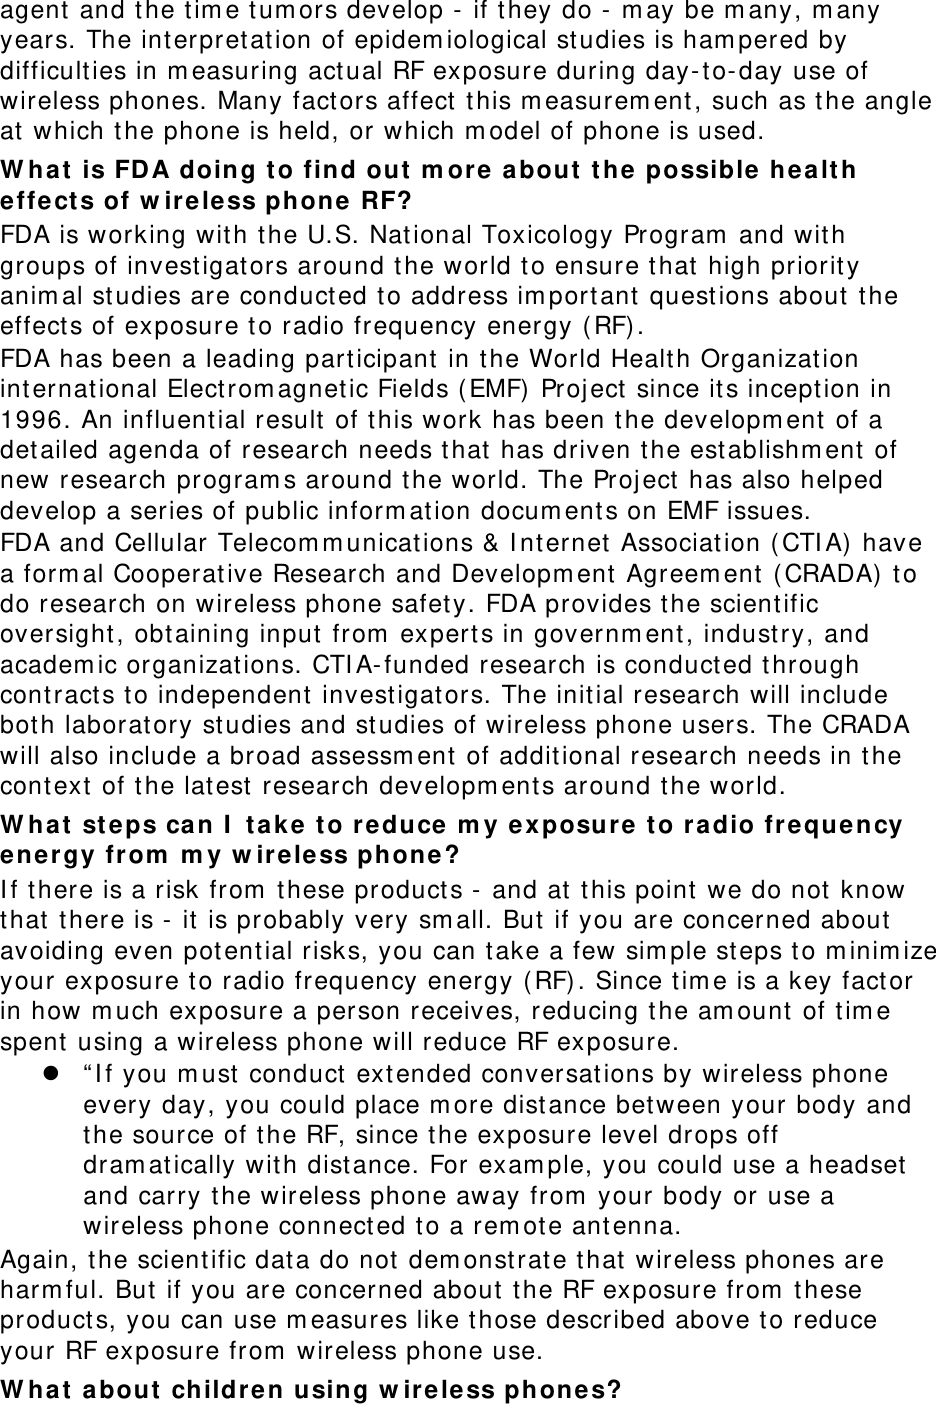 agent and the time tumors develop - if they do - may be many, many years. The interpretation of epidemiological studies is hampered by difficulties in measuring actual RF exposure during day-to-day use of wireless phones. Many factors affect this measurement, such as the angle at which the phone is held, or which model of phone is used. What is FDA doing to find out more about the possible health effects of wireless phone RF? FDA is working with the U.S. National Toxicology Program and with groups of investigators around the world to ensure that high priority animal studies are conducted to address important questions about the effects of exposure to radio frequency energy (RF). FDA has been a leading participant in the World Health Organization international Electromagnetic Fields (EMF) Project since its inception in 1996. An influential result of this work has been the development of a detailed agenda of research needs that has driven the establishment of new research programs around the world. The Project has also helped develop a series of public information documents on EMF issues. FDA and Cellular Telecommunications &amp; Internet Association (CTIA) have a formal Cooperative Research and Development Agreement (CRADA) to do research on wireless phone safety. FDA provides the scientific oversight, obtaining input from experts in government, industry, and academic organizations. CTIA-funded research is conducted through contracts to independent investigators. The initial research will include both laboratory studies and studies of wireless phone users. The CRADA will also include a broad assessment of additional research needs in the context of the latest research developments around the world. What steps can I take to reduce my exposure to radio frequency energy from my wireless phone? If there is a risk from these products - and at this point we do not know that there is - it is probably very small. But if you are concerned about avoiding even potential risks, you can take a few simple steps to minimize your exposure to radio frequency energy (RF). Since time is a key factor in how much exposure a person receives, reducing the amount of time spent using a wireless phone will reduce RF exposure. z “If you must conduct extended conversations by wireless phone every day, you could place more distance between your body and the source of the RF, since the exposure level drops off dramatically with distance. For example, you could use a headset and carry the wireless phone away from your body or use a wireless phone connected to a remote antenna. Again, the scientific data do not demonstrate that wireless phones are harmful. But if you are concerned about the RF exposure from these products, you can use measures like those described above to reduce your RF exposure from wireless phone use. What about children using wireless phones? 